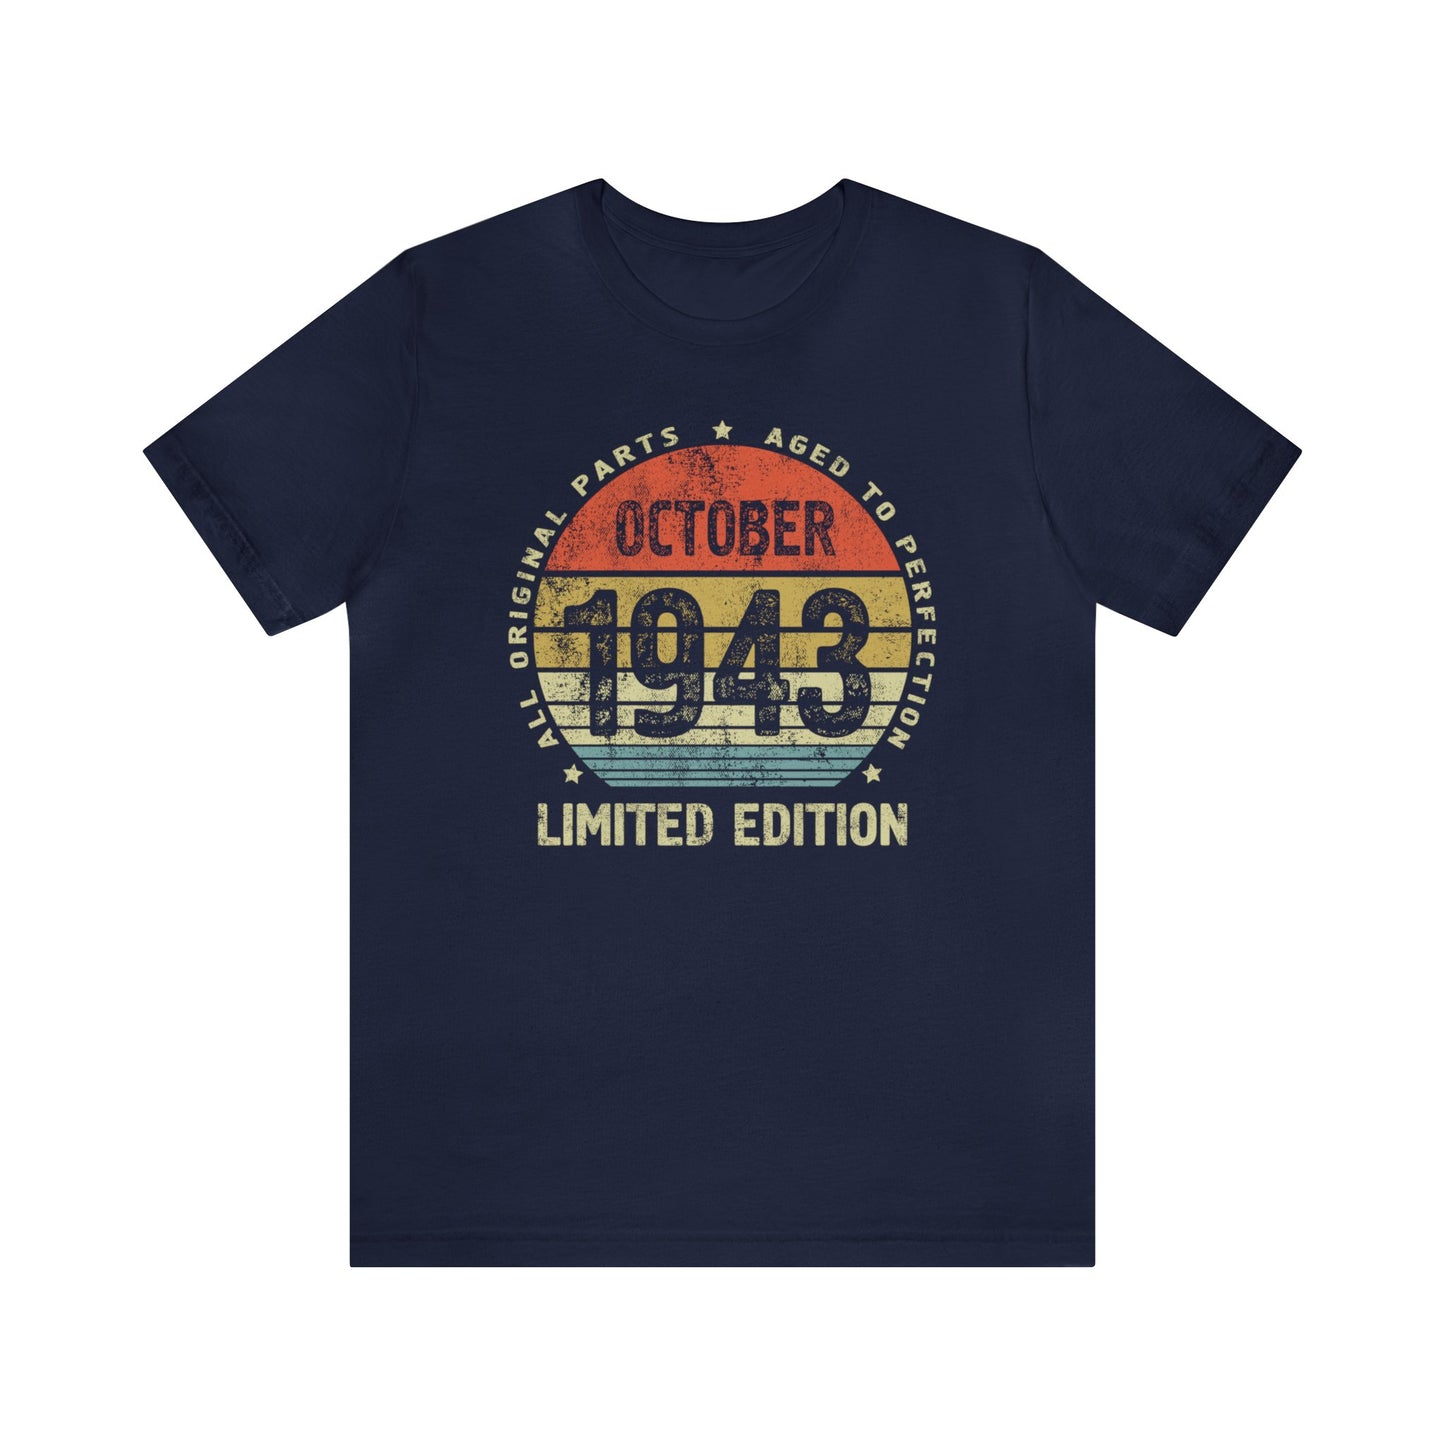 80th birthday shirt for men or women October 1943 birthday gift for sister or brother